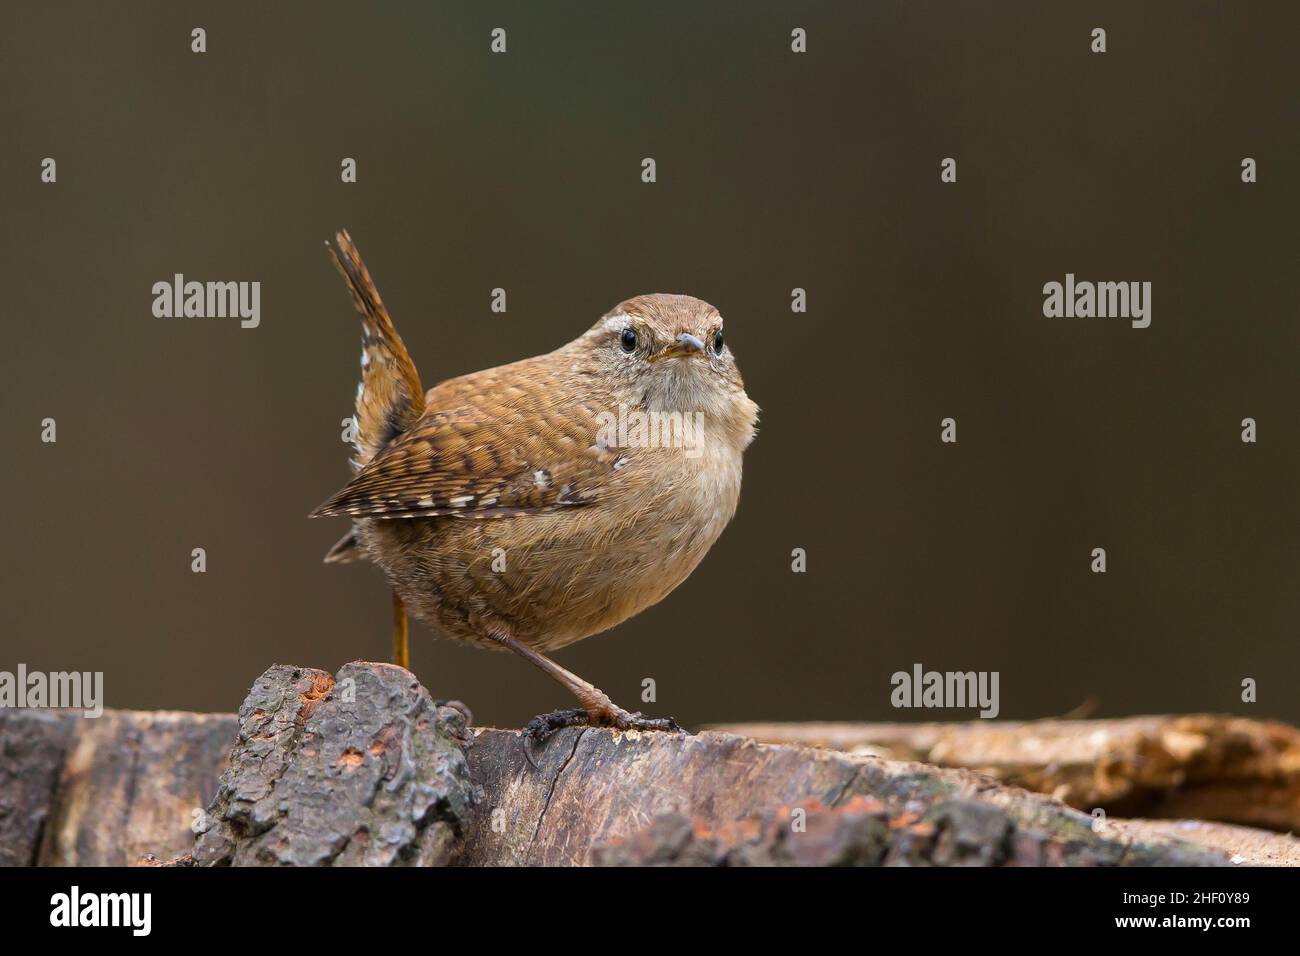 Close up view of a wild, UK wren bird (Troglodytes troglodytes) isolated outdoors standing on a woodland tree log, tail cocked. Stock Photo